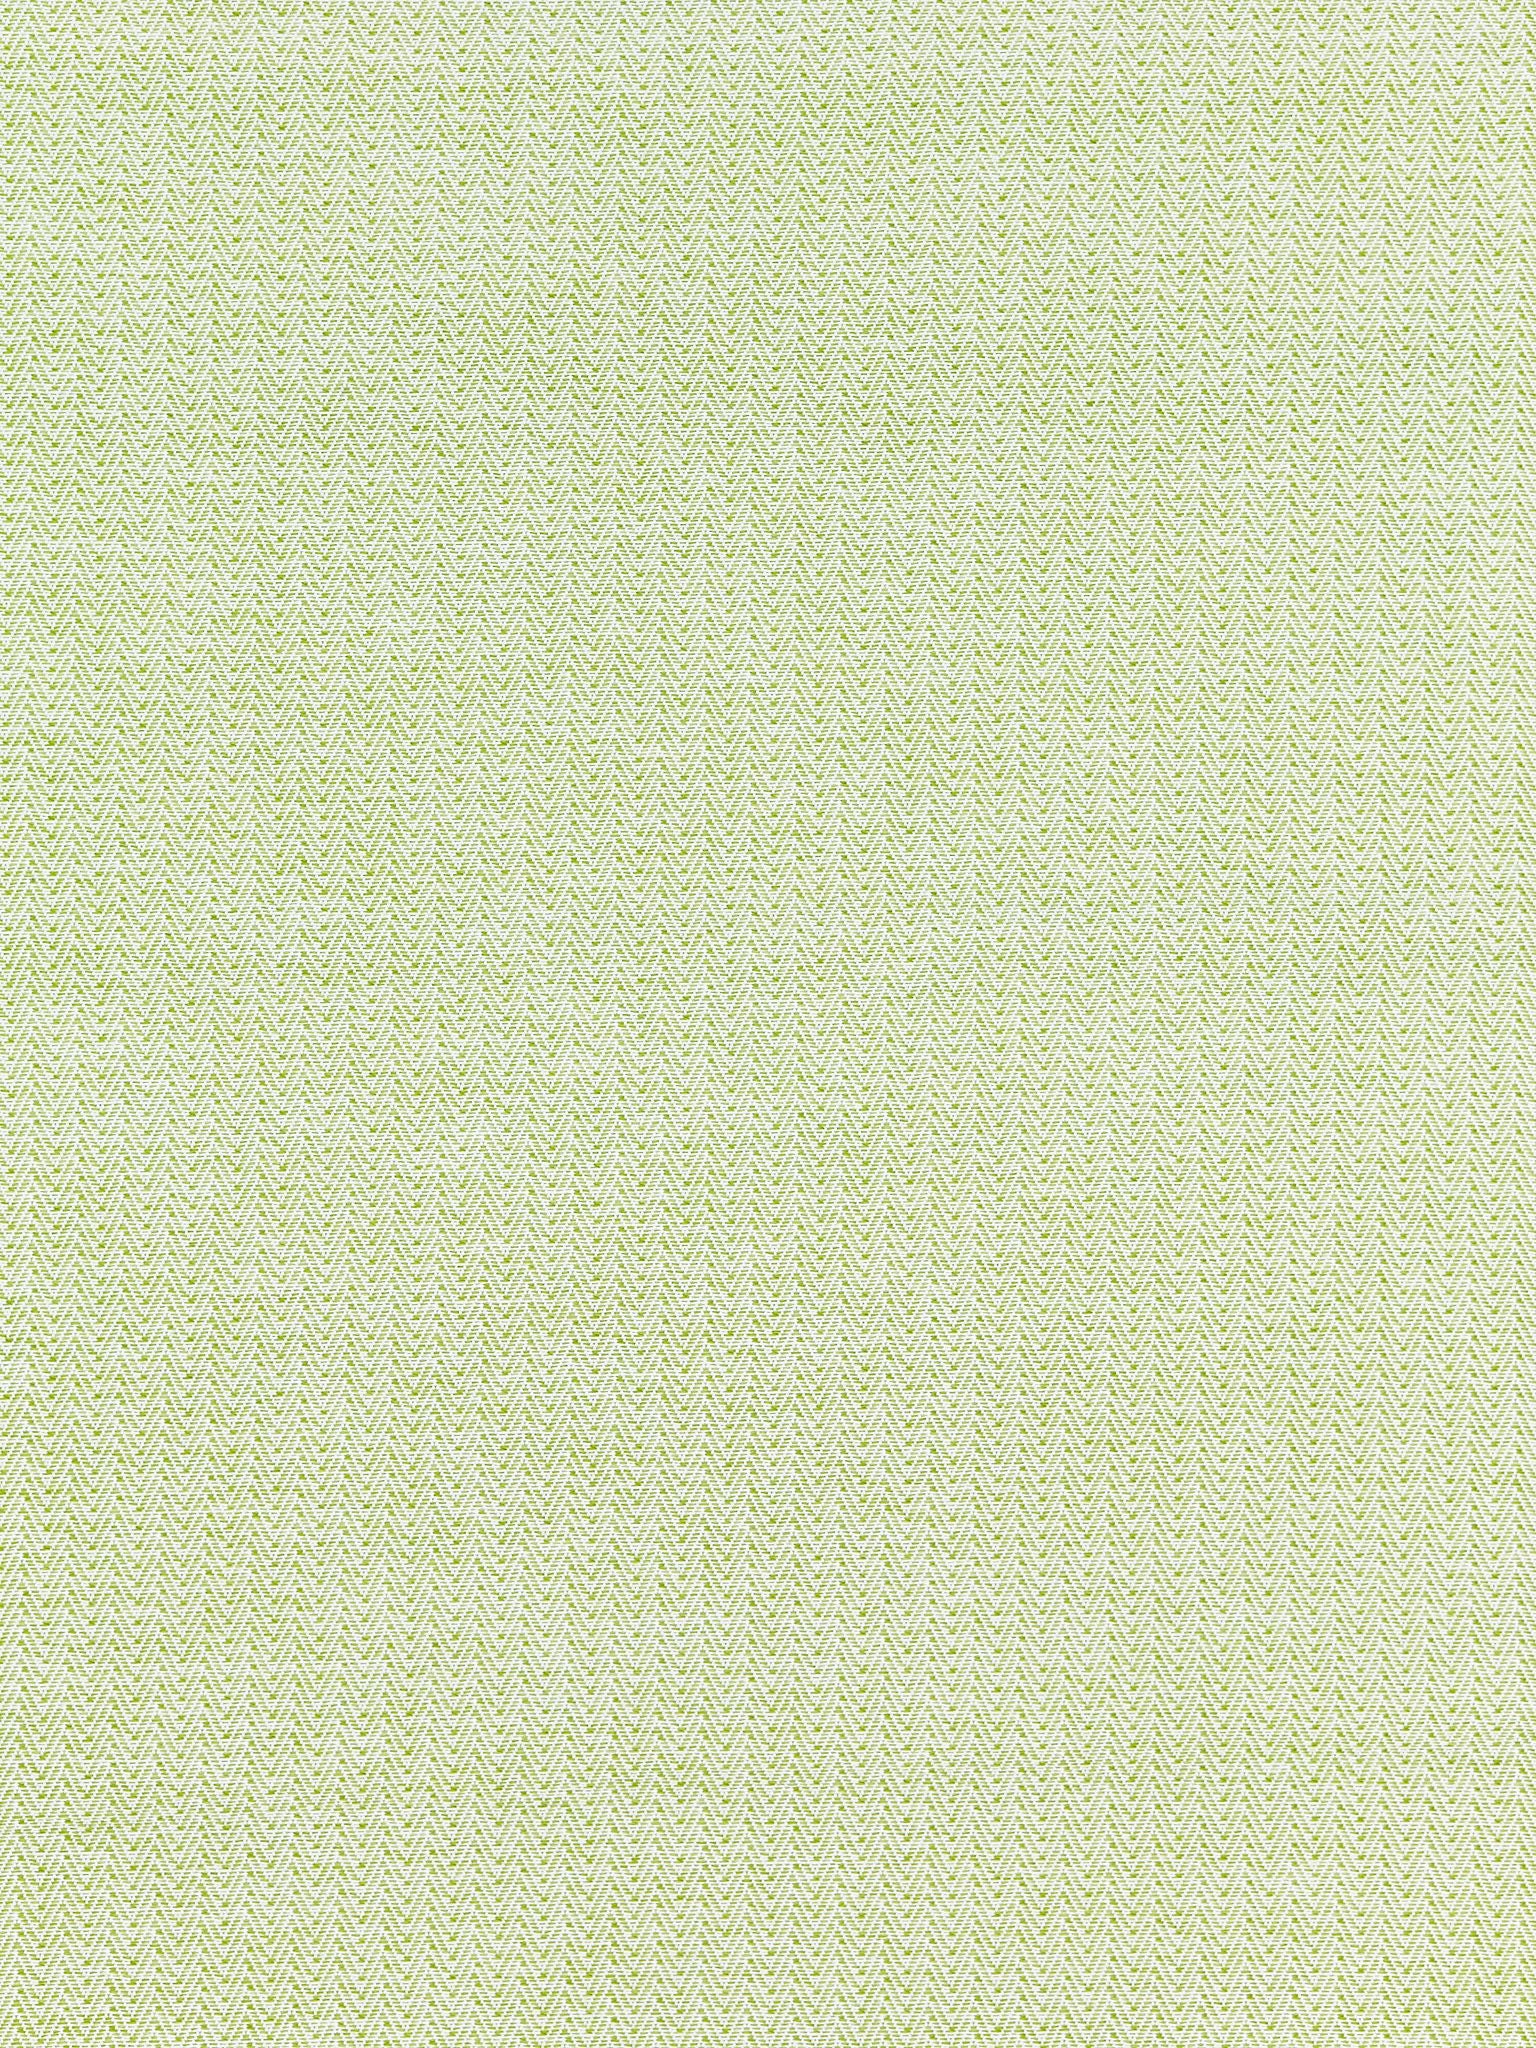 Capri Herringbone fabric in palm color - pattern number SC 000227191 - by Scalamandre in the Scalamandre Fabrics Book 1 collection